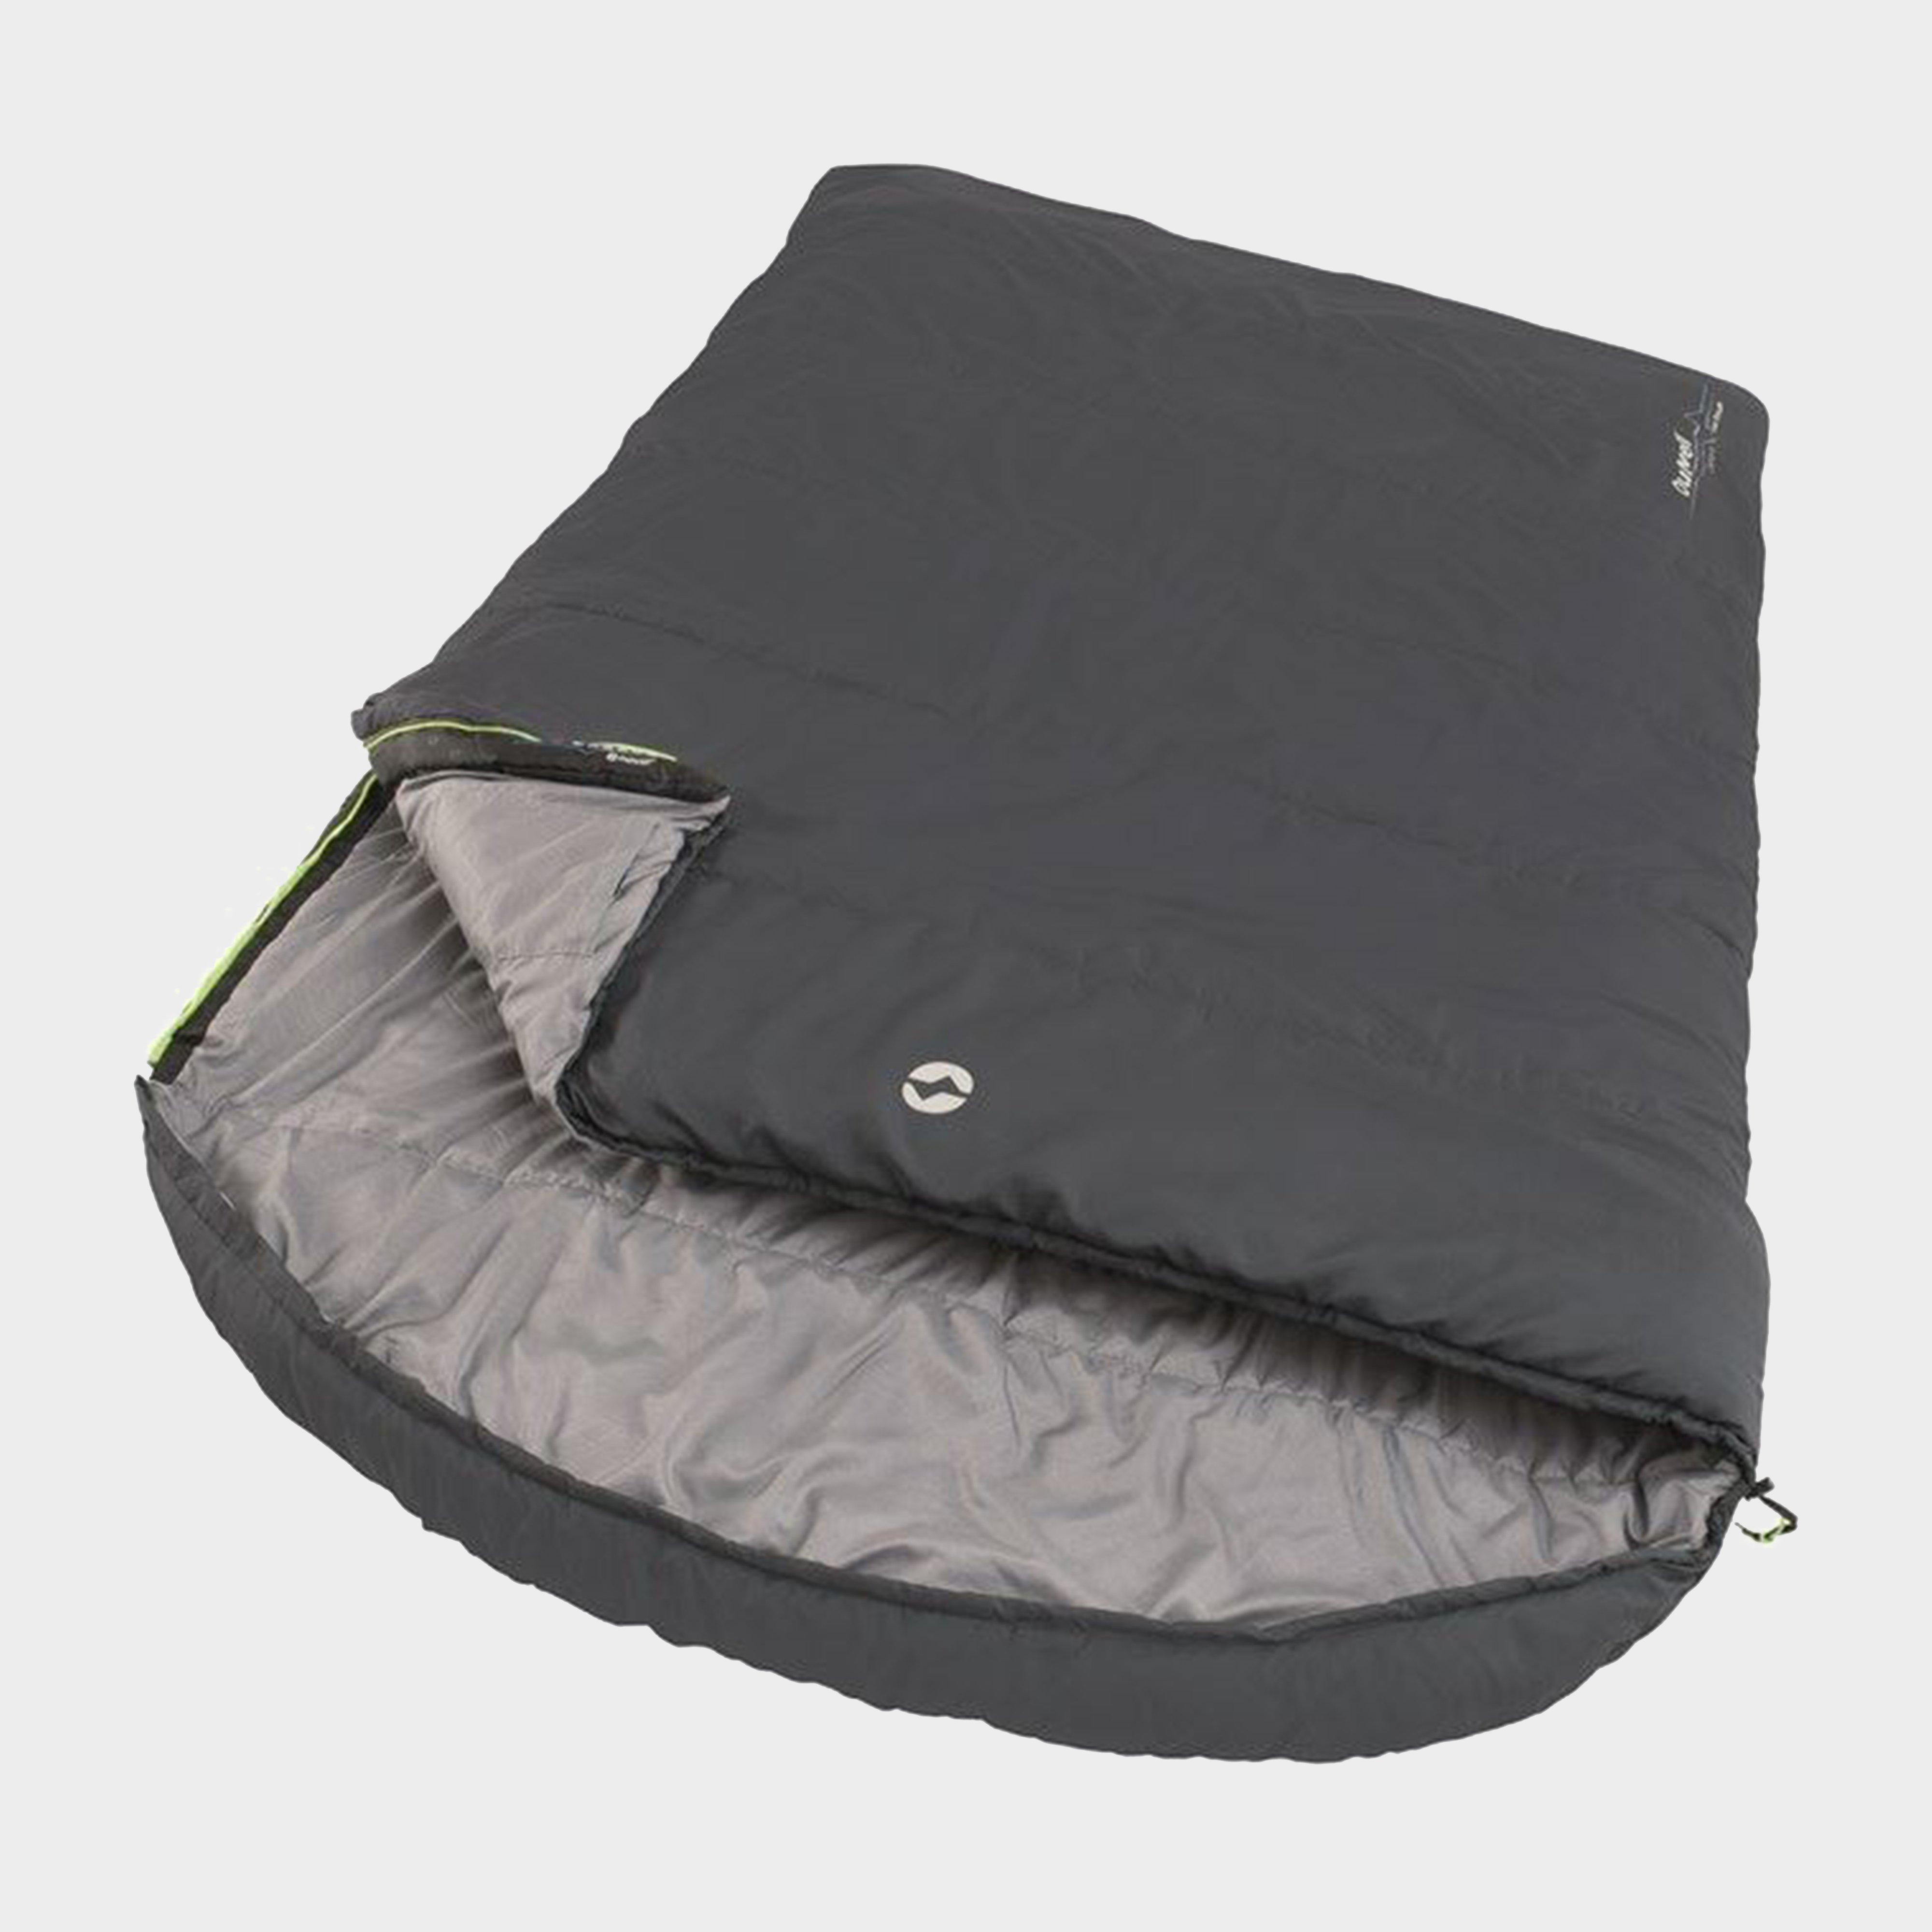  Outwell Campion Lux Double Sleeping Bag, Grey